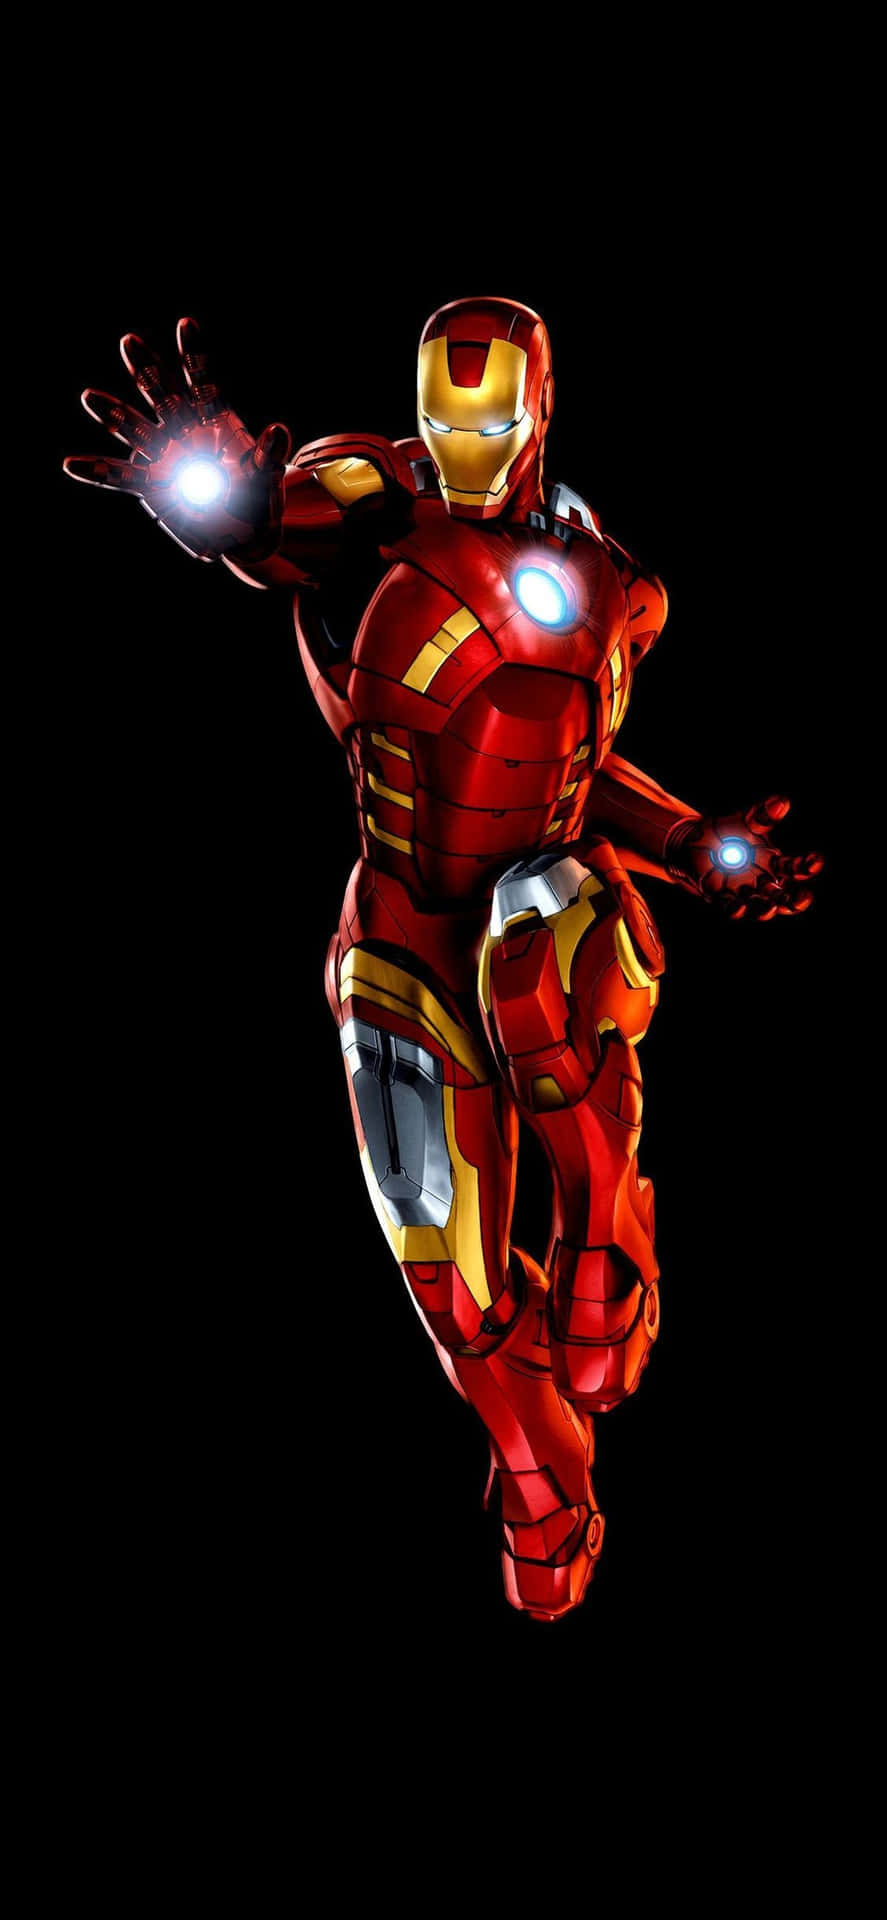 Iphone X Iron Man Background Pointing His Blasters